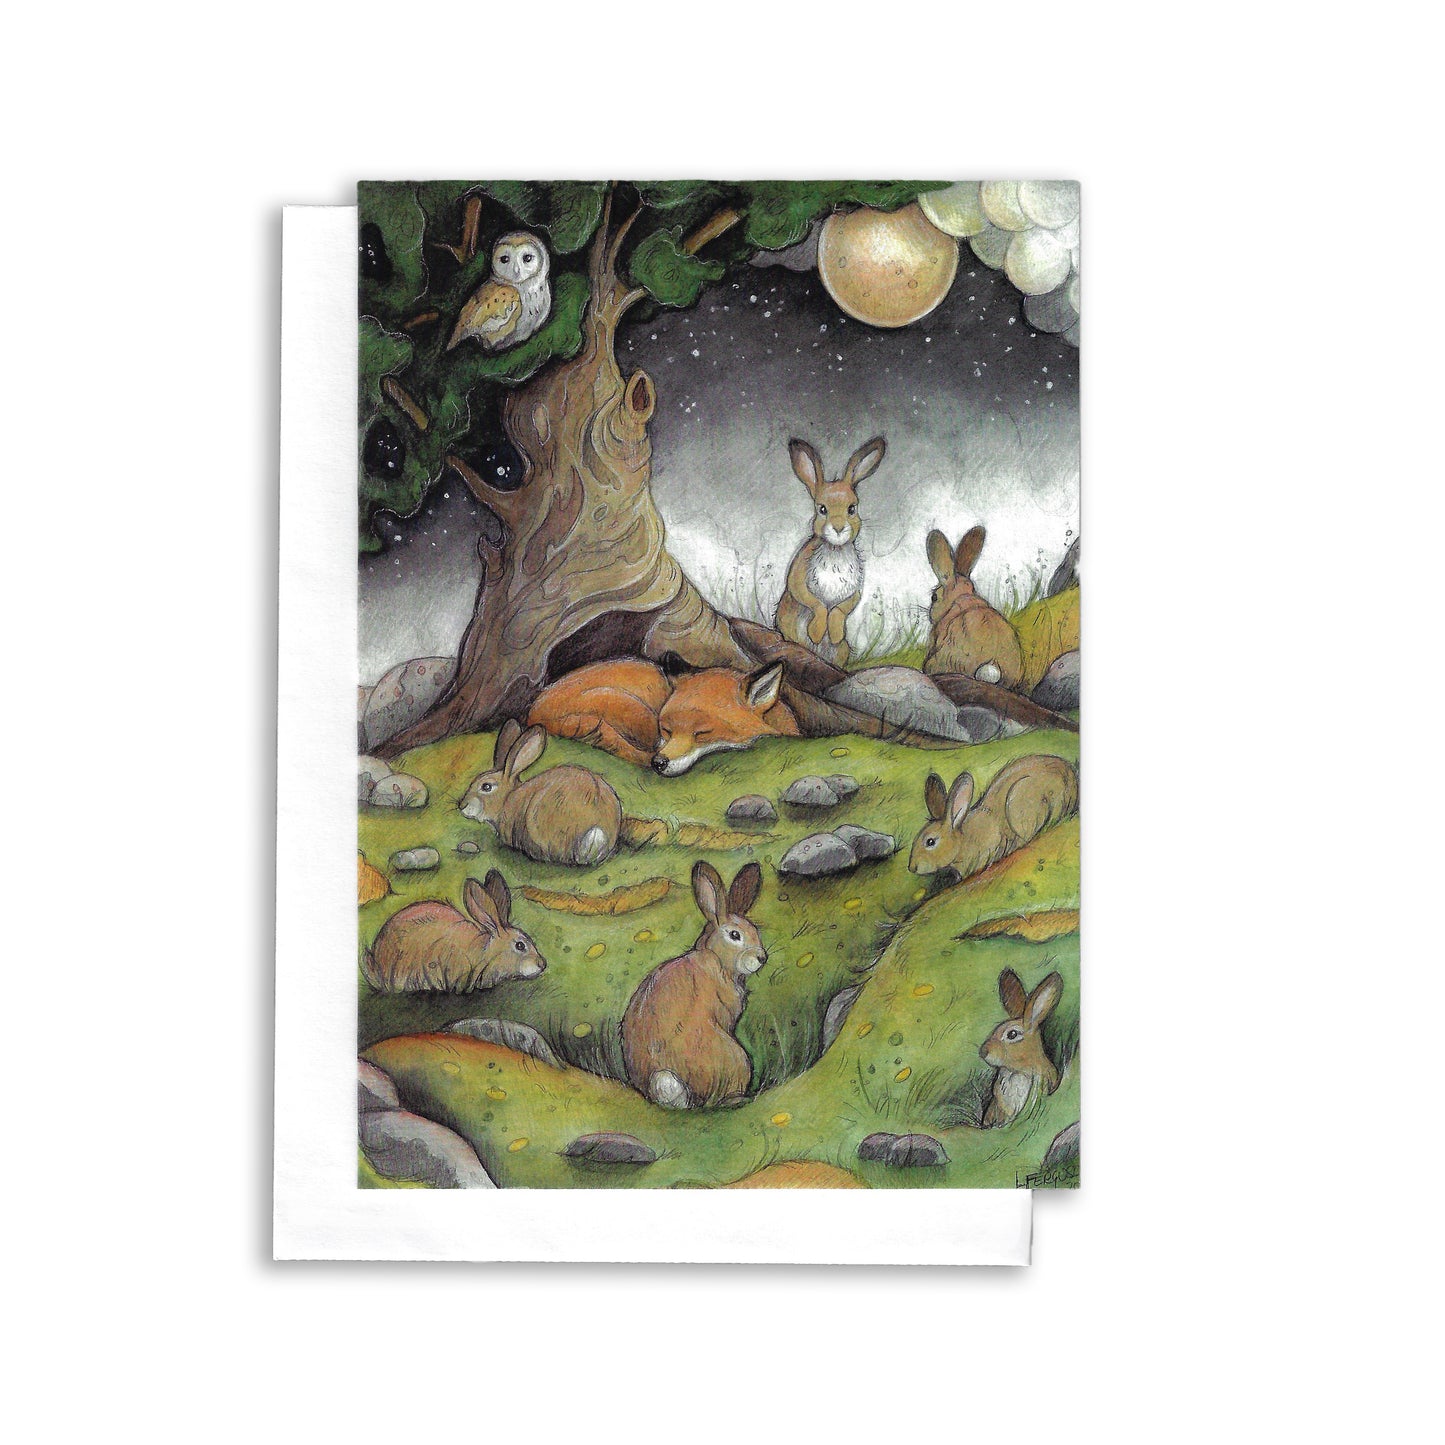 an illustrated greeting card of a fox sleeping by a tree under a full moon. Many rabbits surround the sleeping fox . A barn owl sits in the tree.